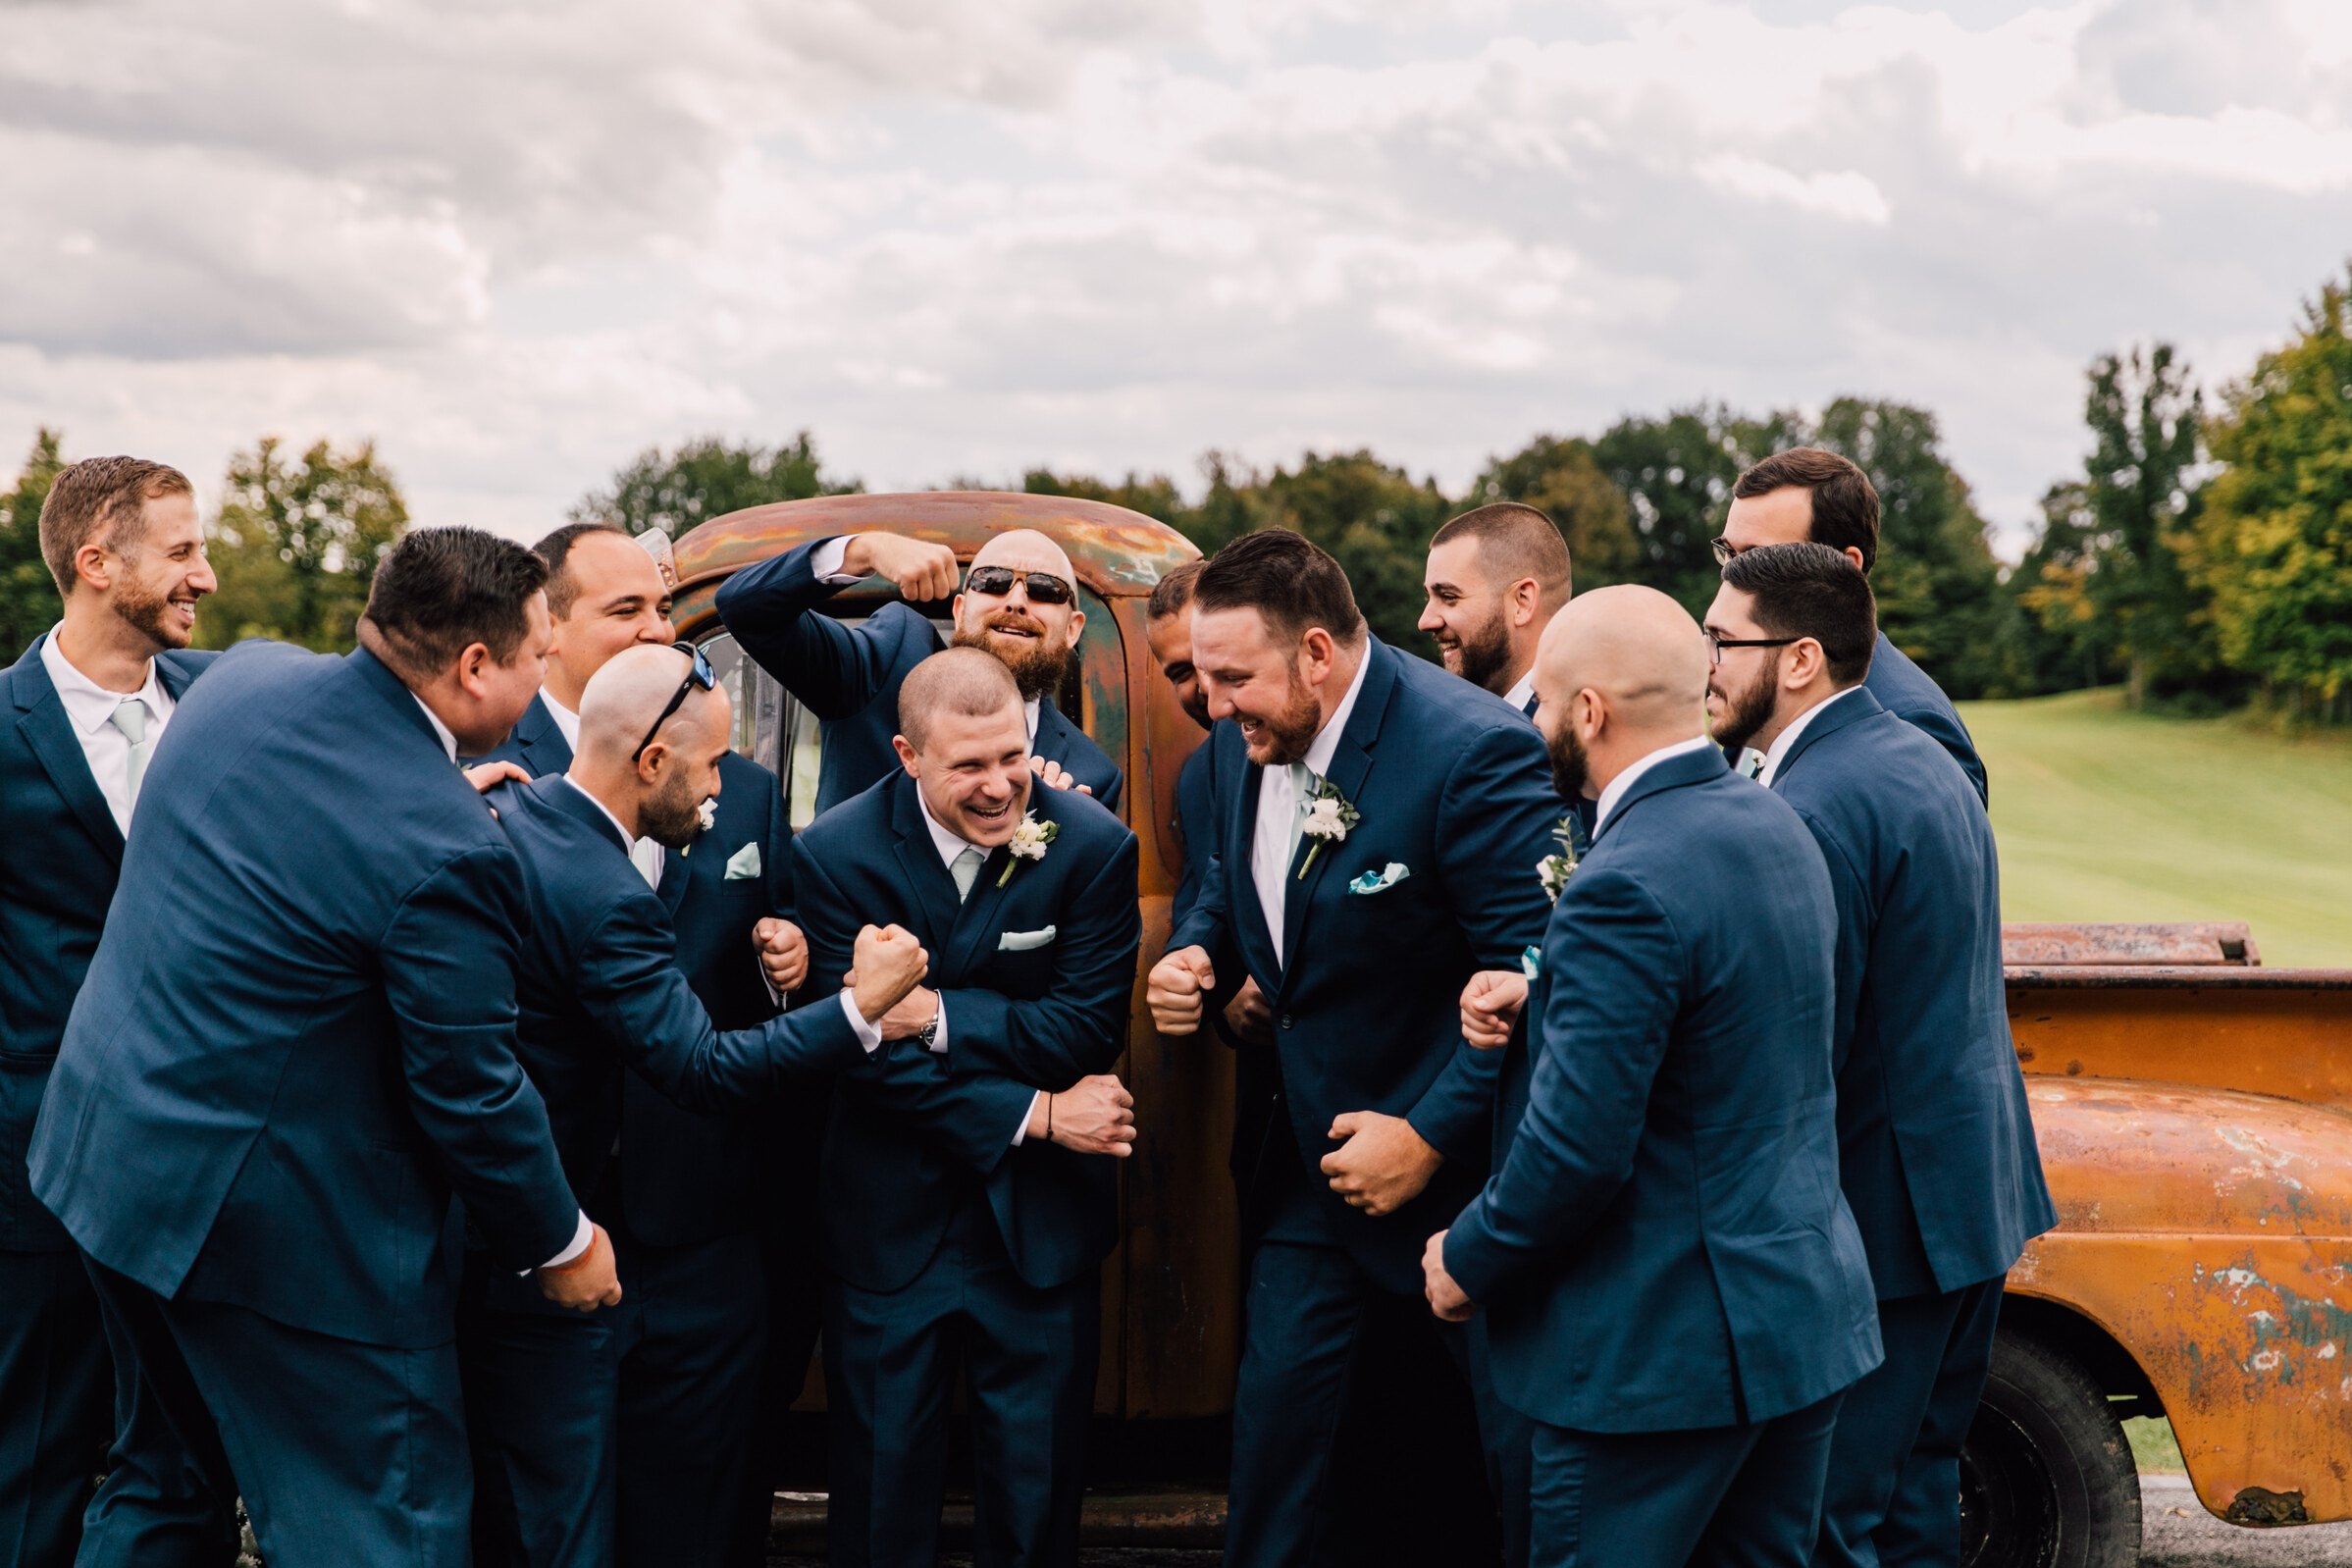  The groom and groomsmen stand in front of a vintage truck as the groomsmen laugh and pump up the groom&nbsp; 